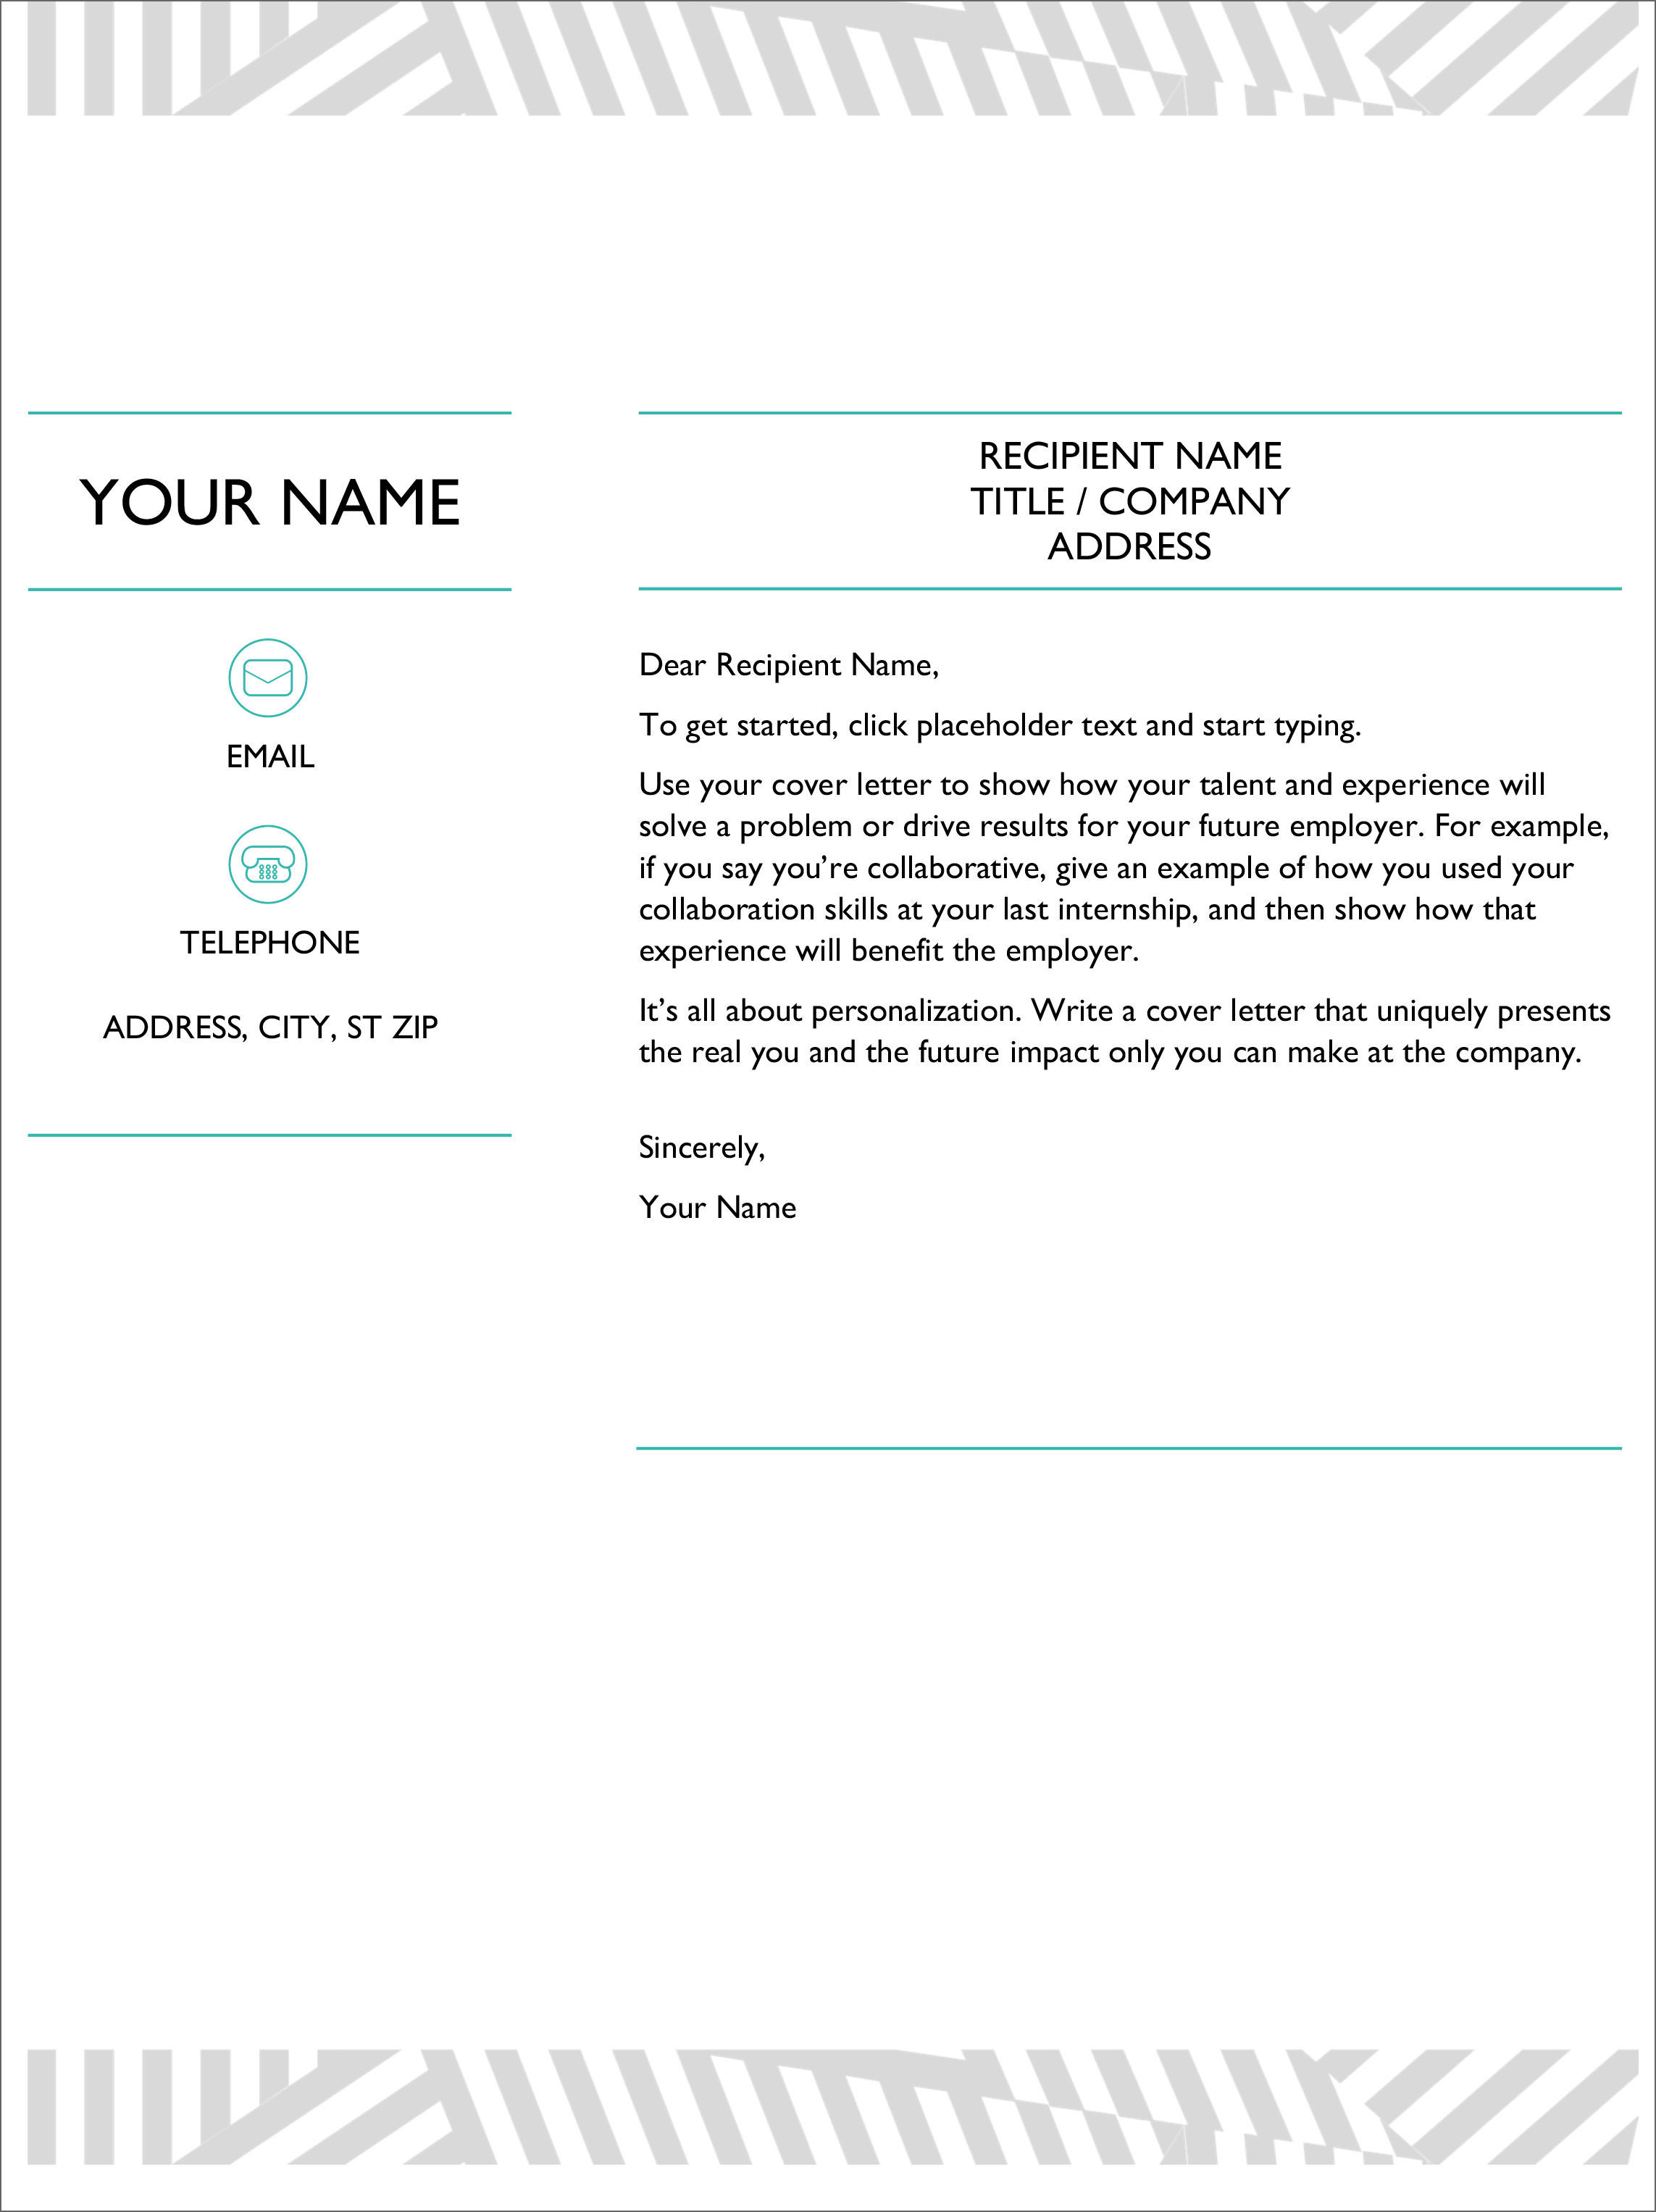 Microsoft Word Cover Letter Template Download from cdn3.geckoandfly.com